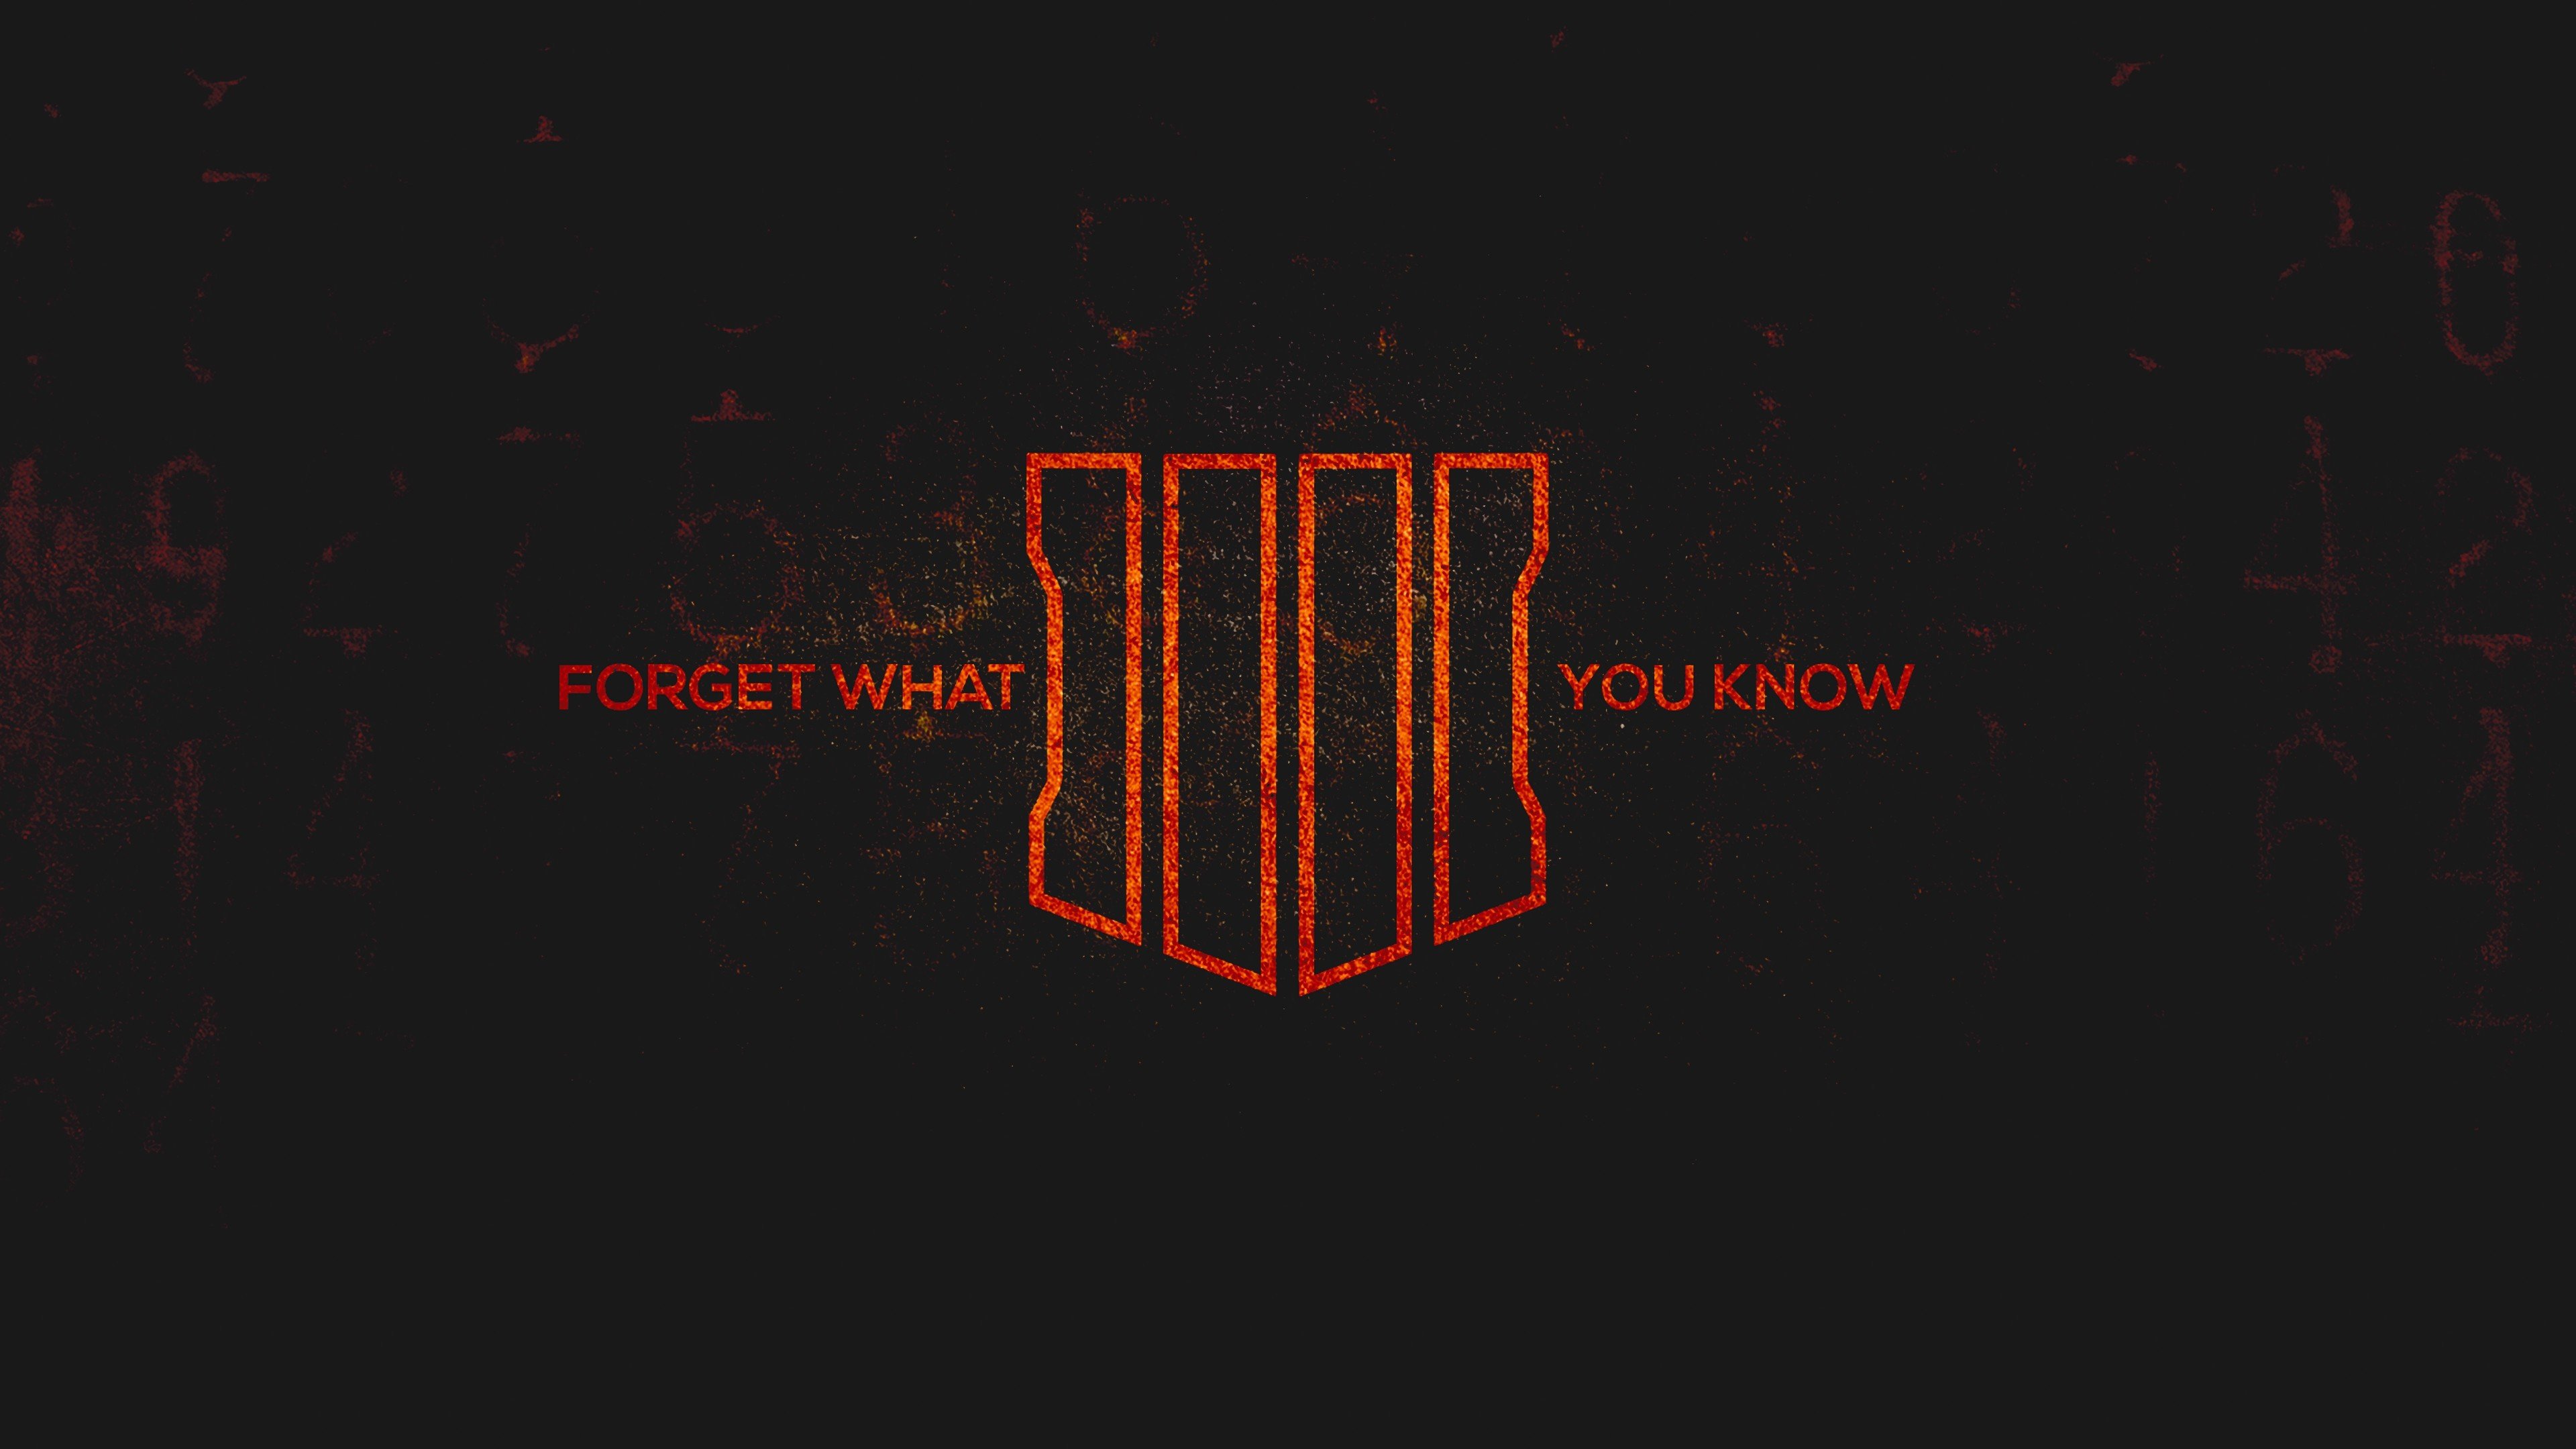 Fondos de pantalla Call of Duty Black Ops 4 Forget What You Know